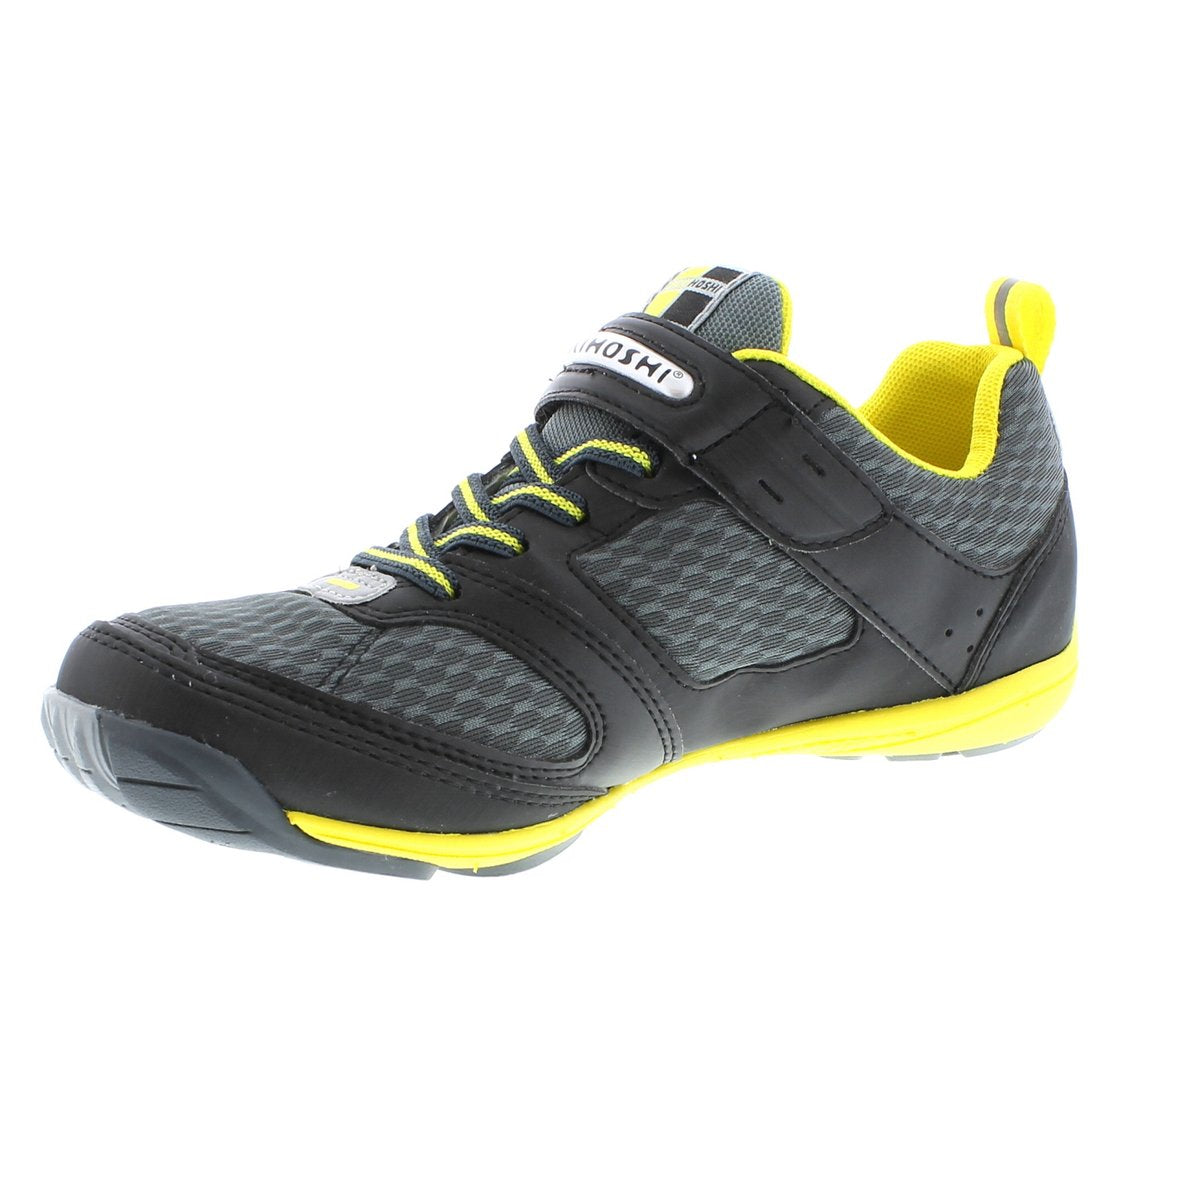 Youth Tsukihoshi Mako Sneaker in Black/Yellow from the front view